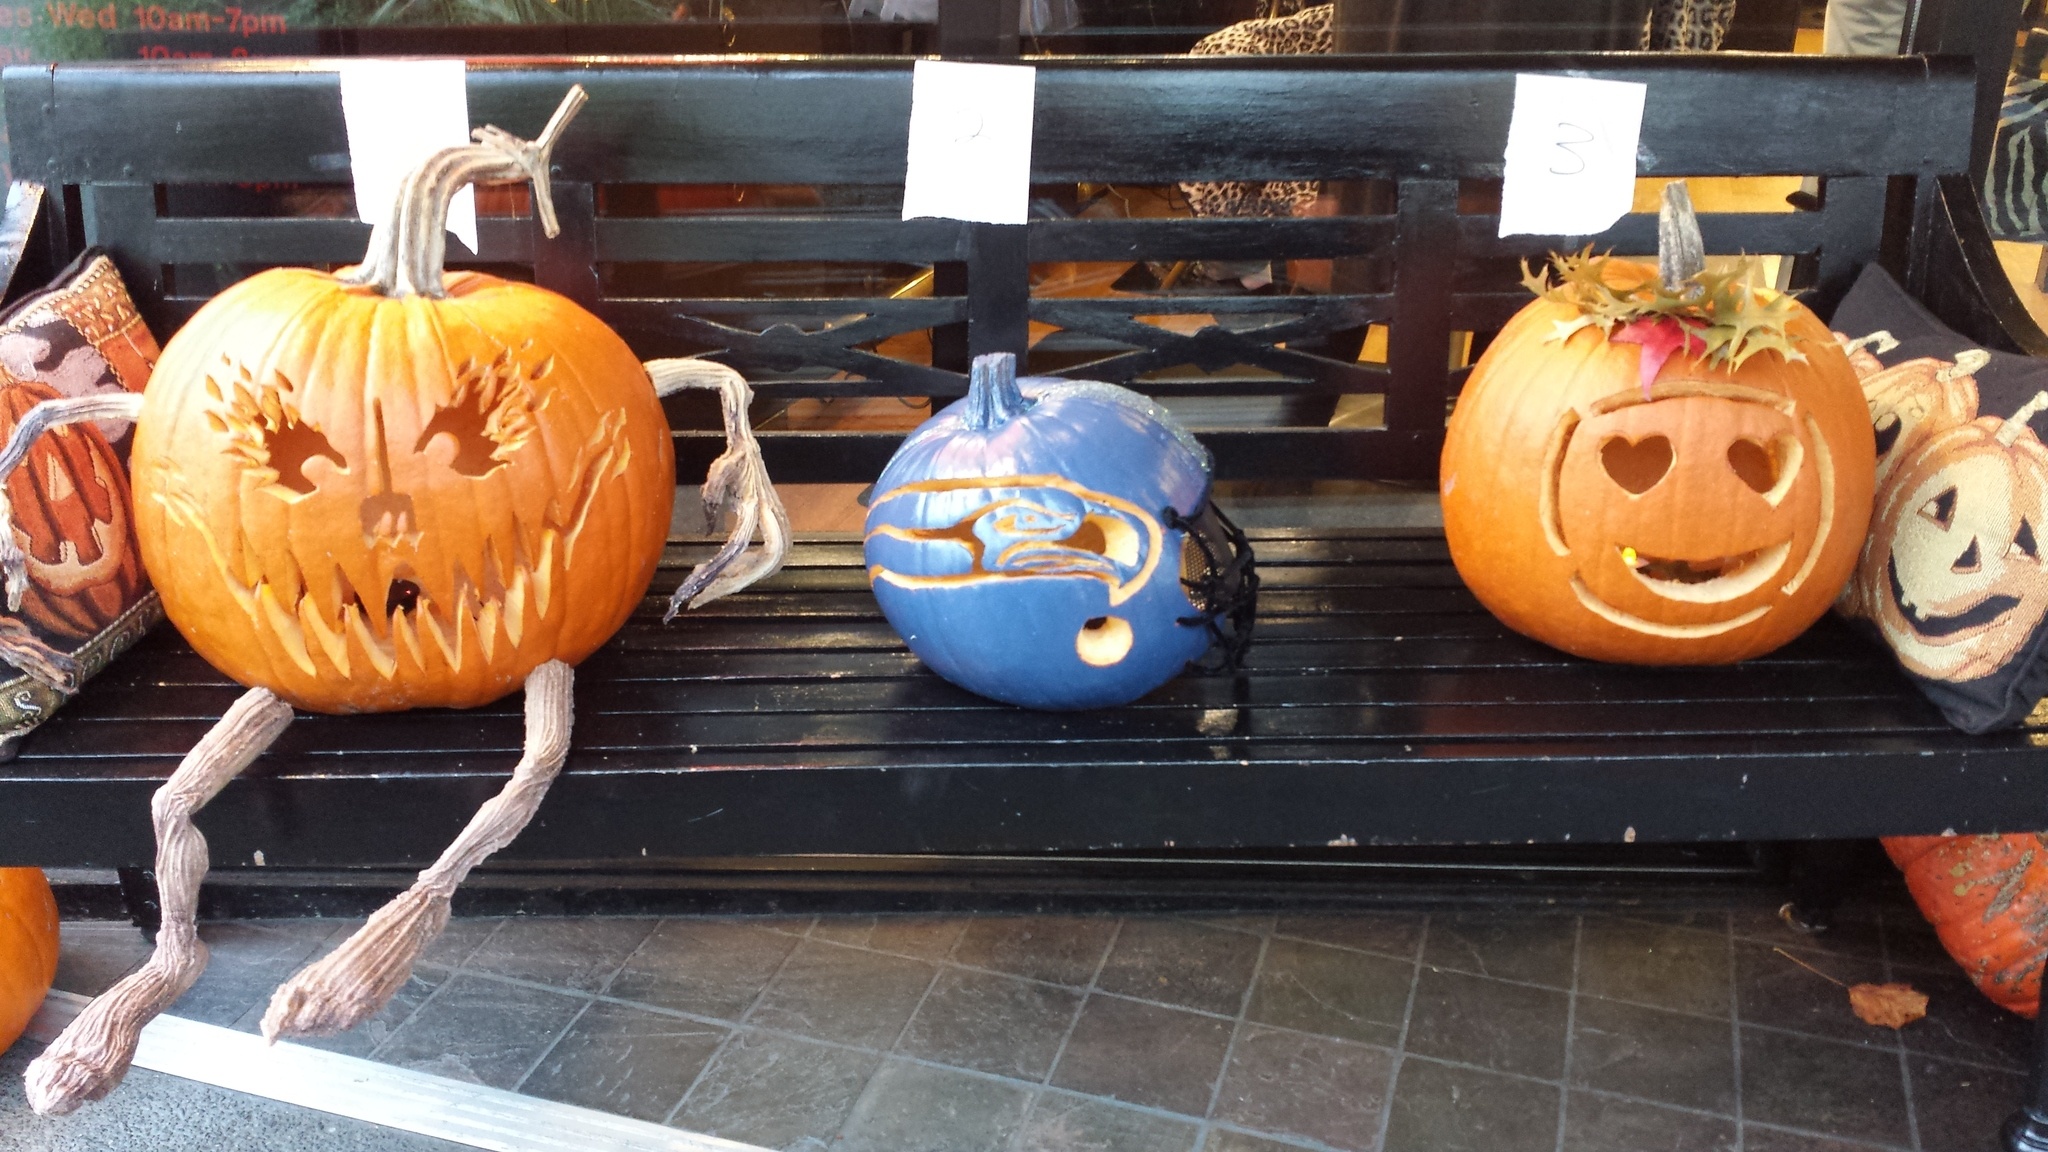 Entries from last year’s Bombaii Cutters Carving Contest are on display. Submitted photo